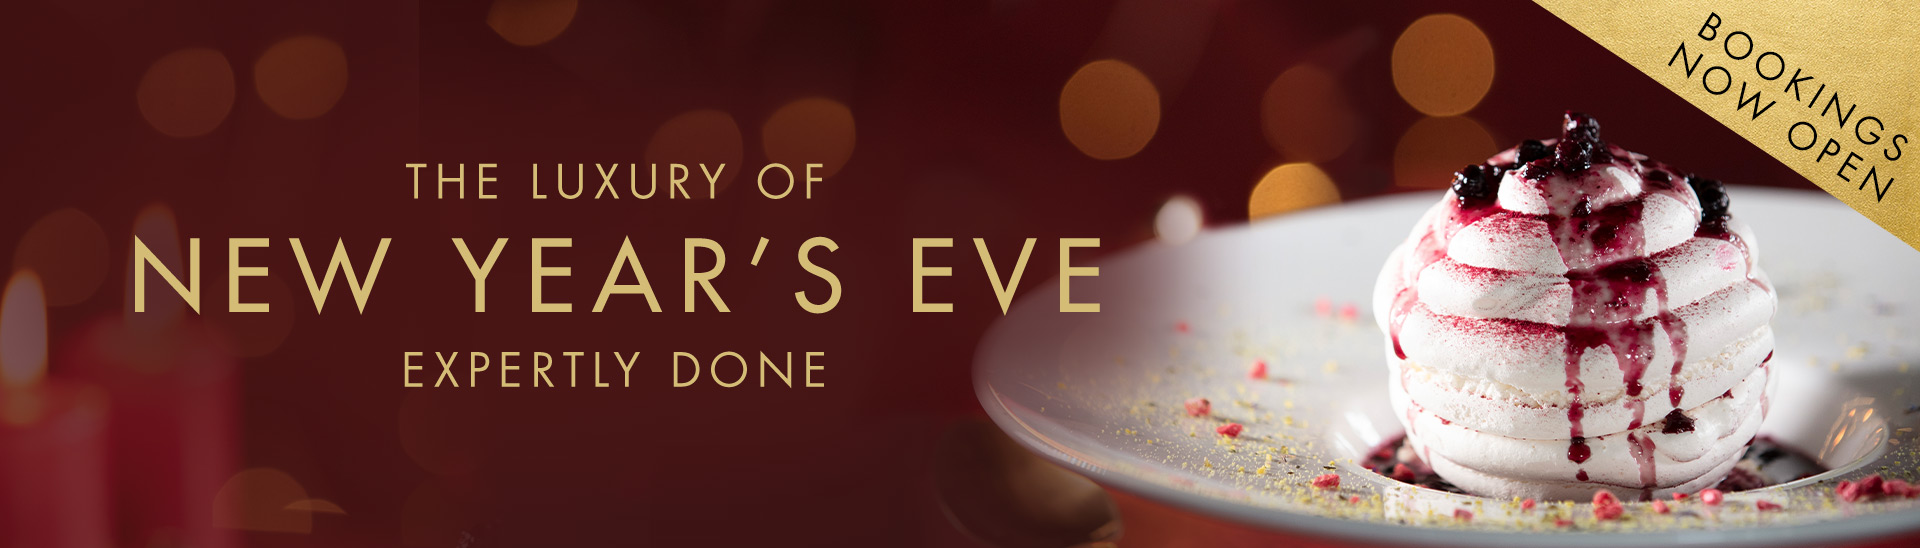 New Year’s Eve Menu at Miller & Carter Colchester • Book Now